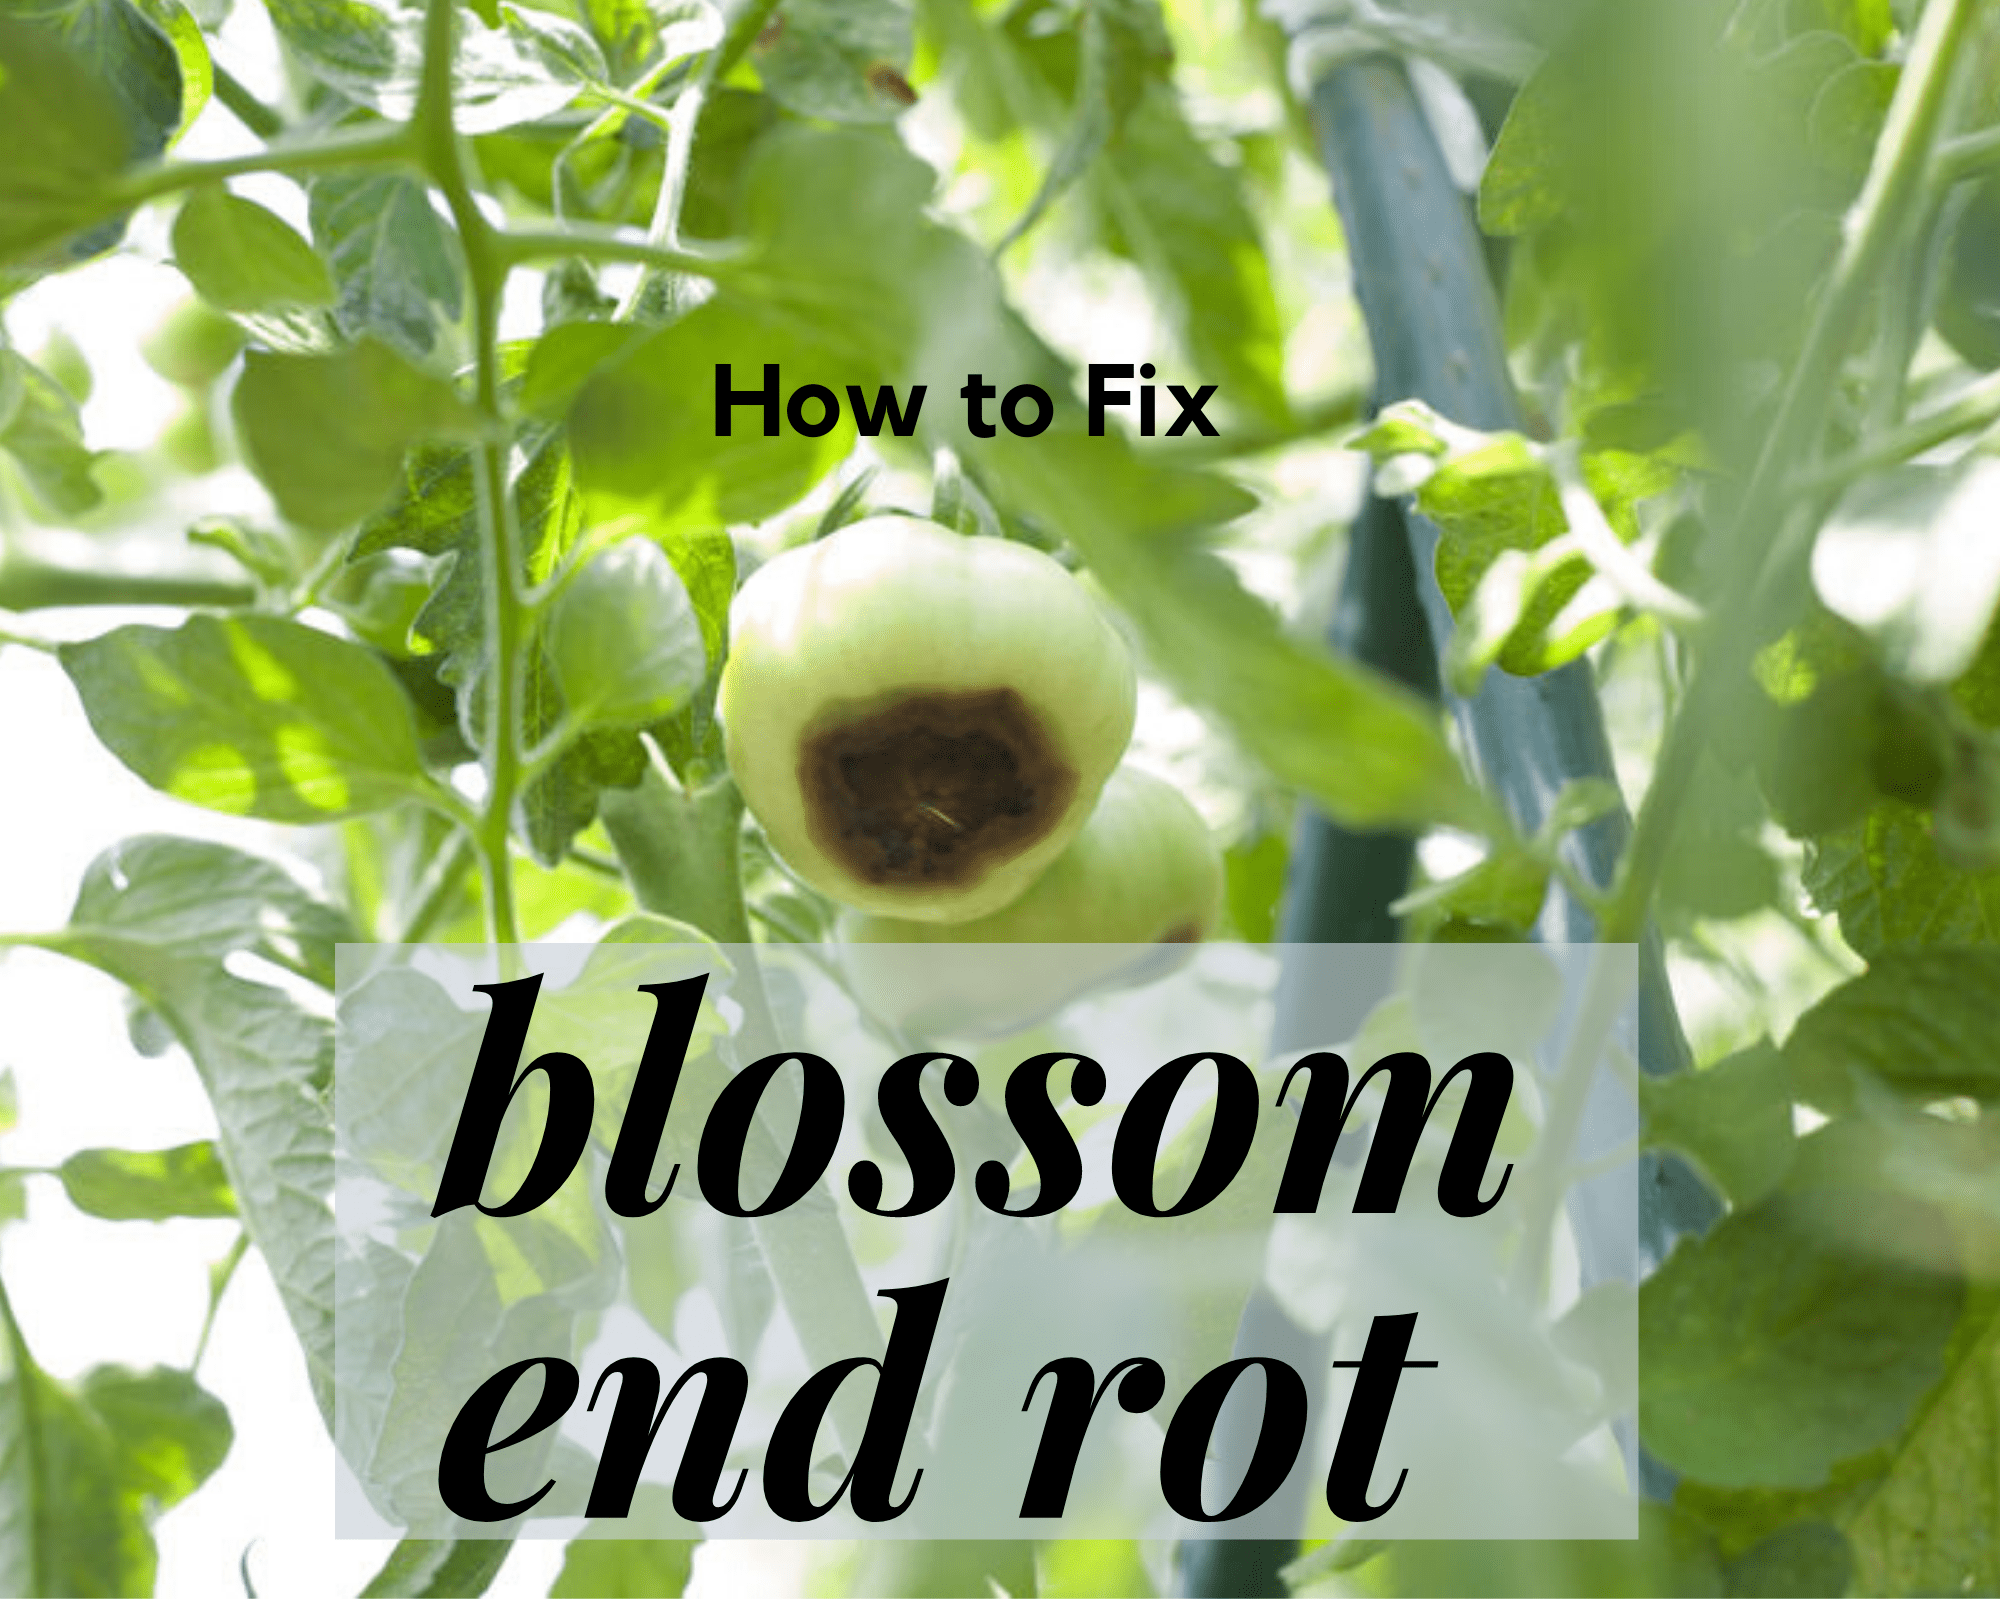 Blossom End Rot on Tomatoes: How to Fix it